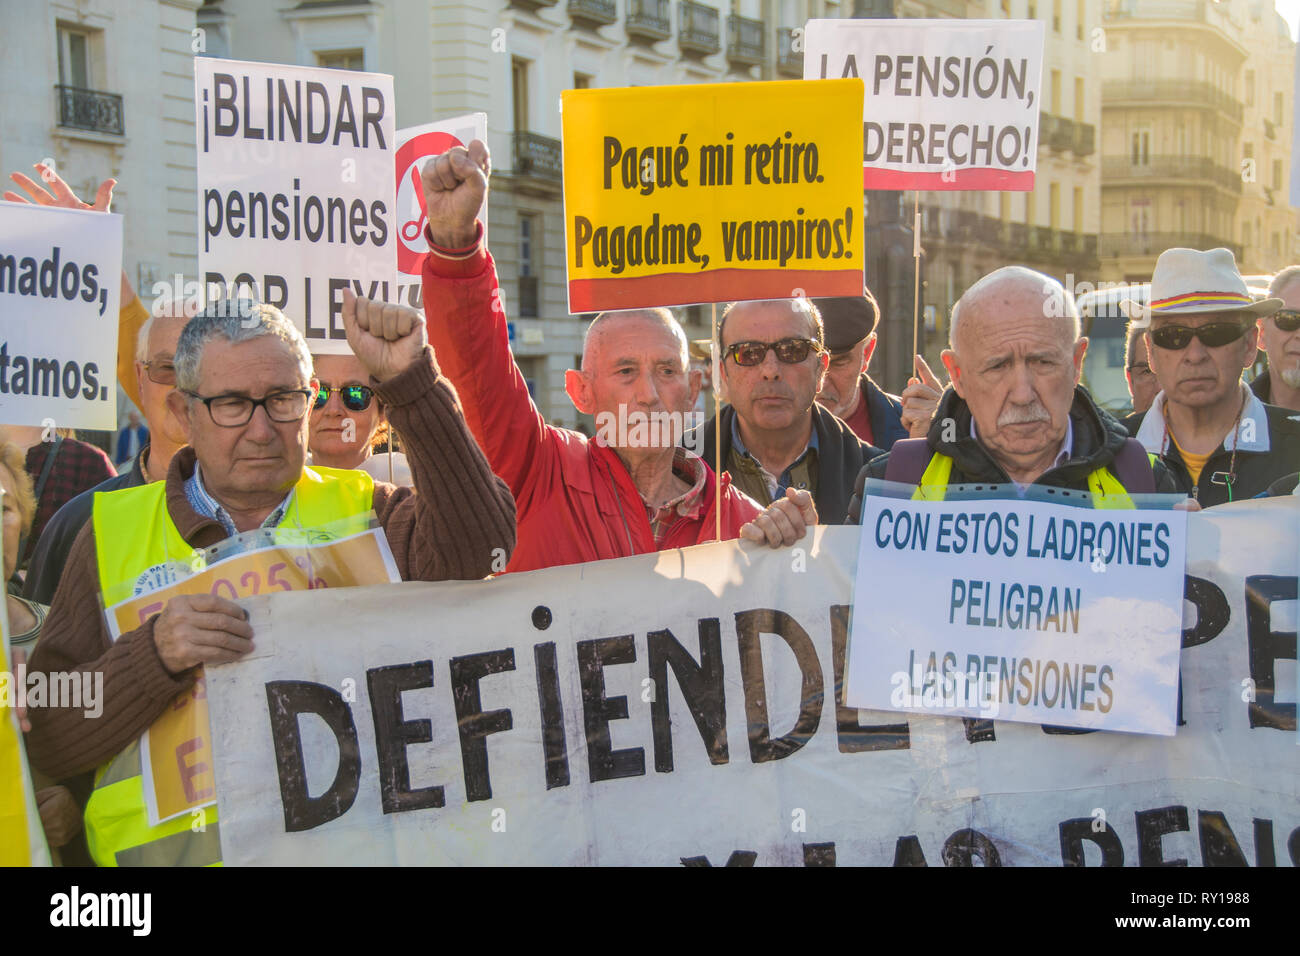 Madrid, Spain. 11th March, 2019. People with placards, ¨pay me my pension thieves, with these thieves the pensions are in danger¨ People from different regions of Madrid demonstrates againts pension cuts in Spain Credit: Alberto Sibaja Ramírez/Alamy Live News Stock Photo